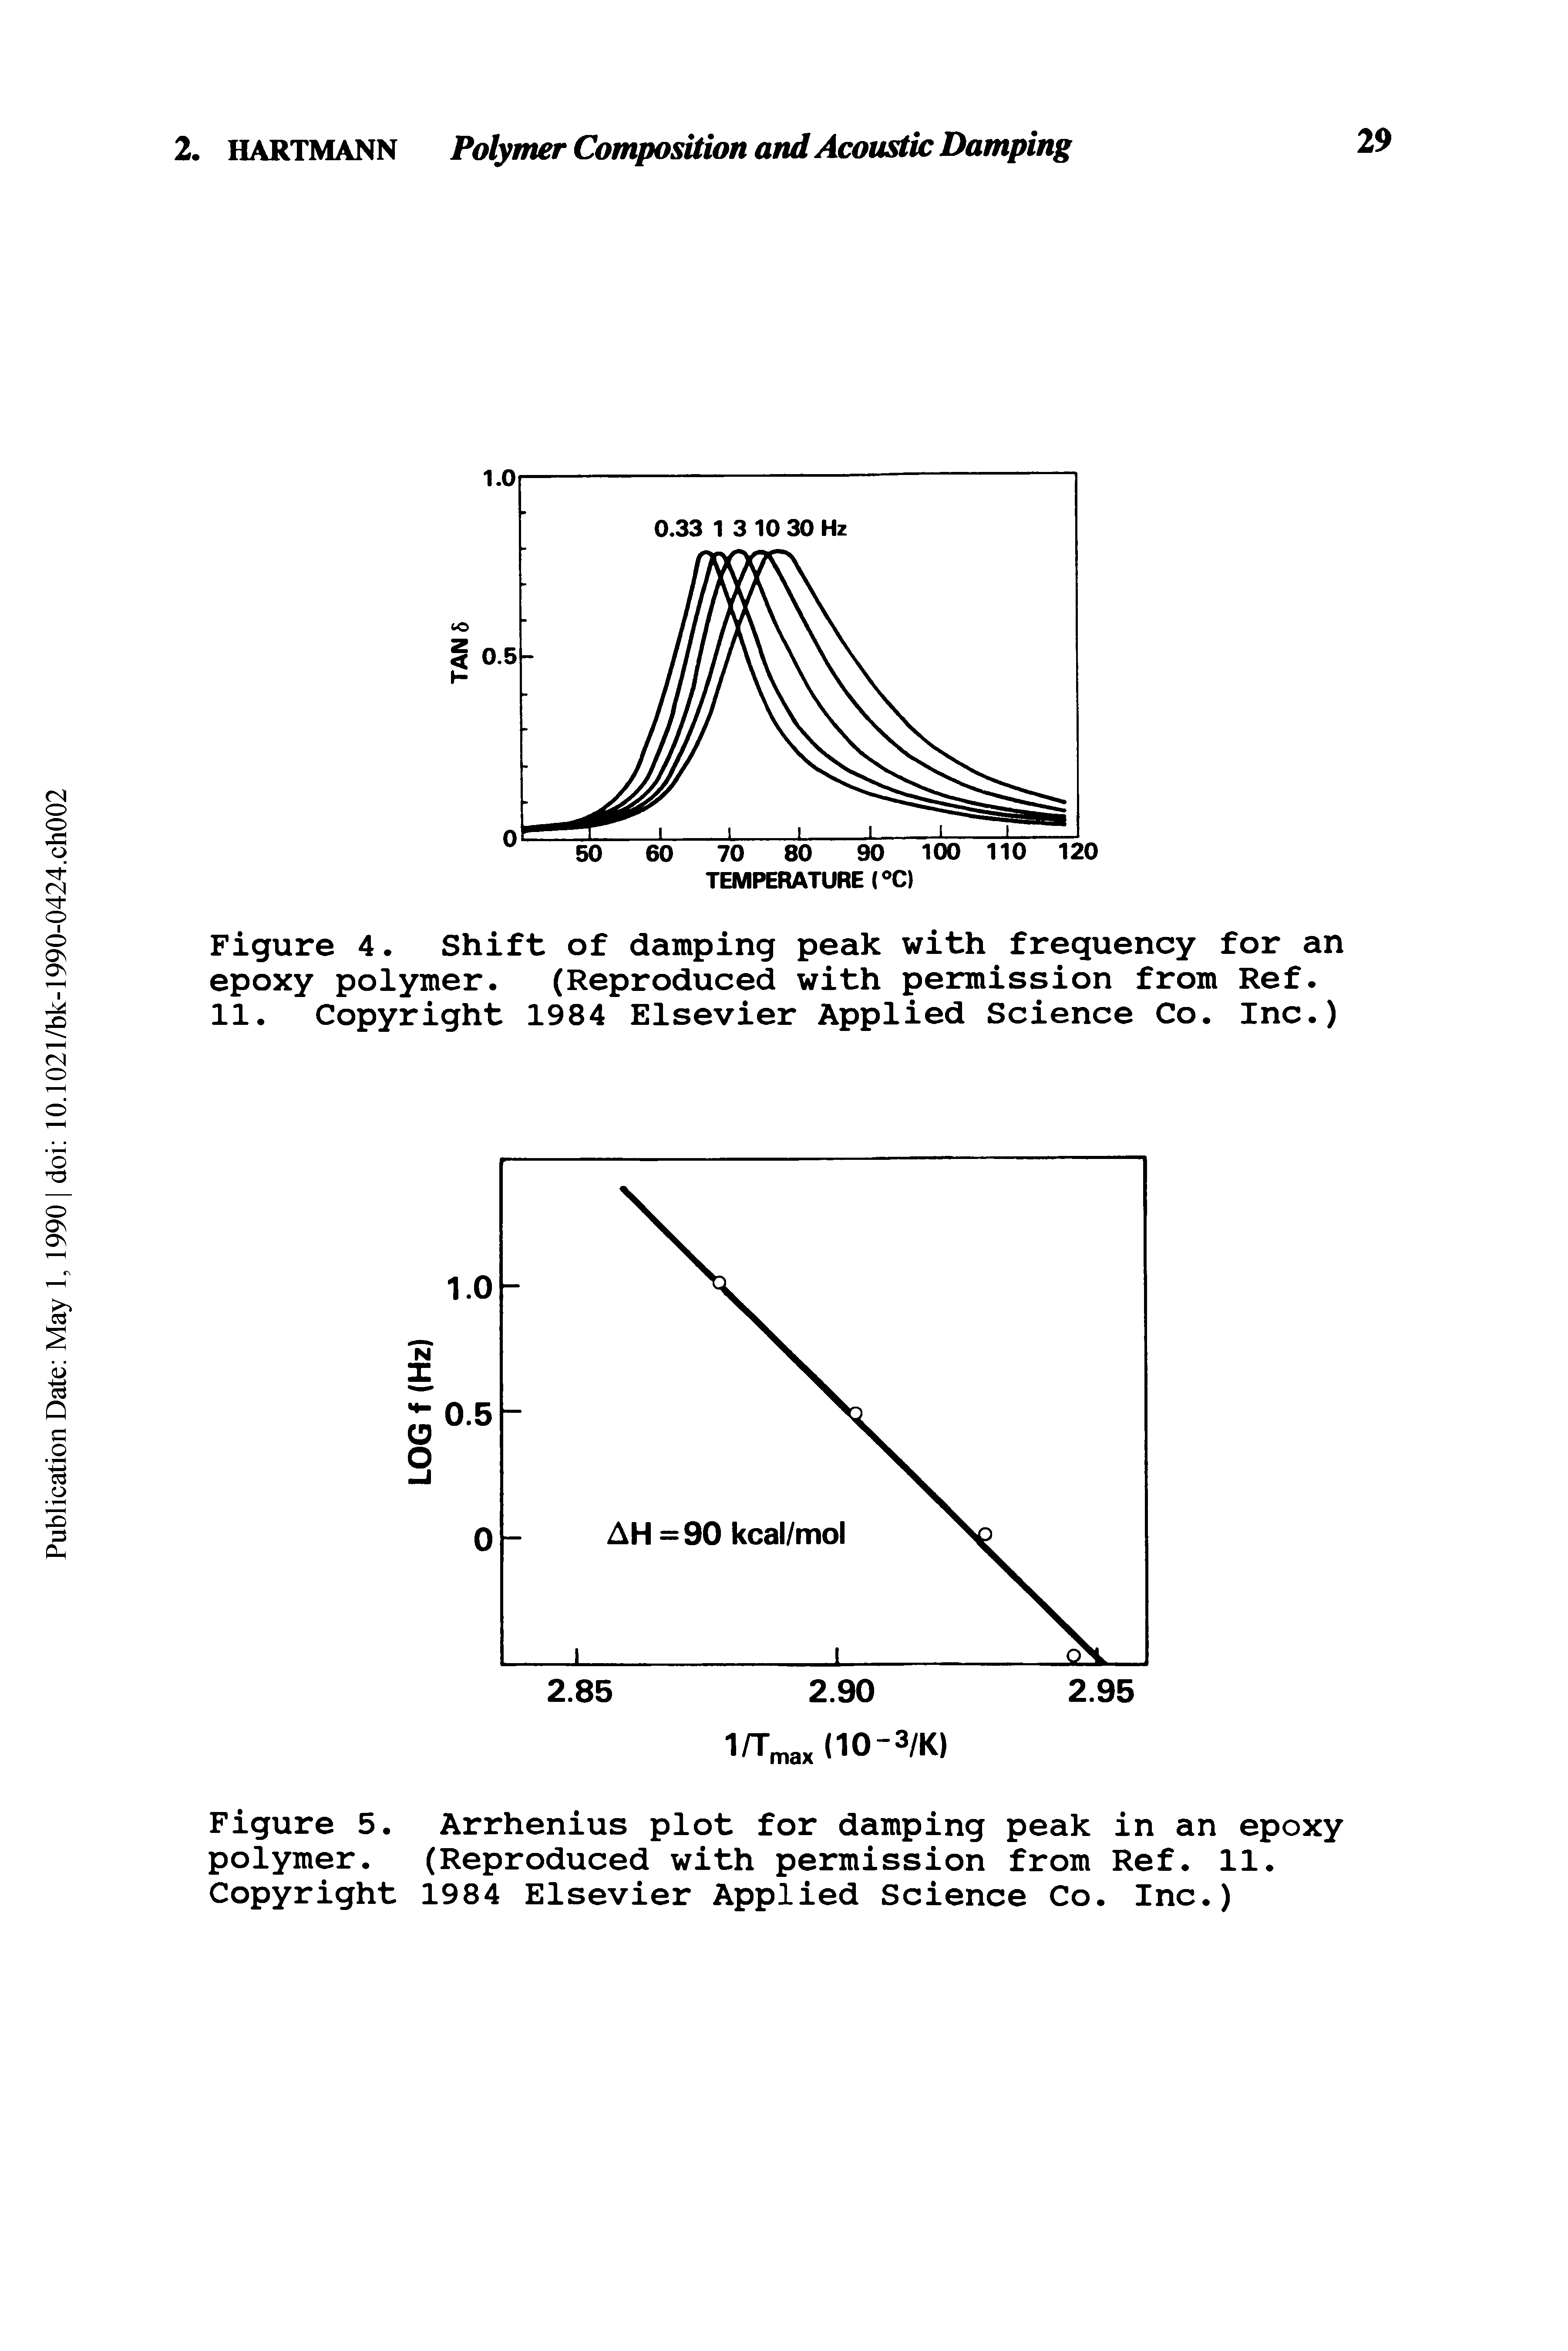 Figure 4. Shift of damping peak with frequency for an epoxy polymer. (Reproduced with permission from Ref. 11. Copyright 1984 Elsevier Applied Science Co. Inc.)...